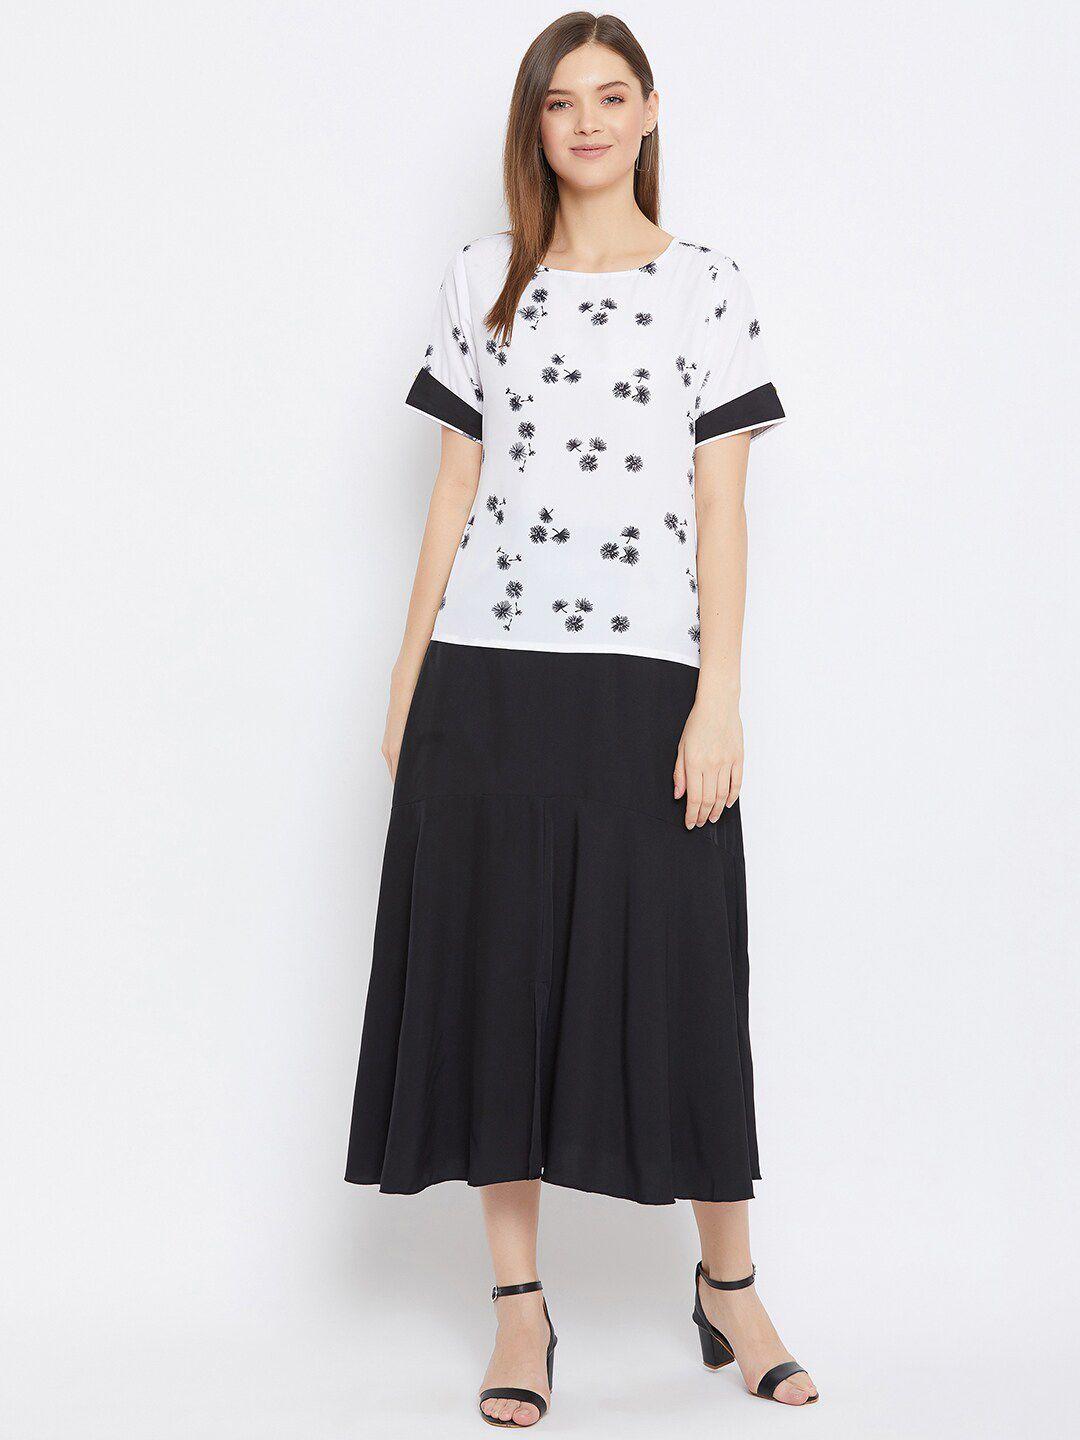 bitterlime women white & black printed top with skirt